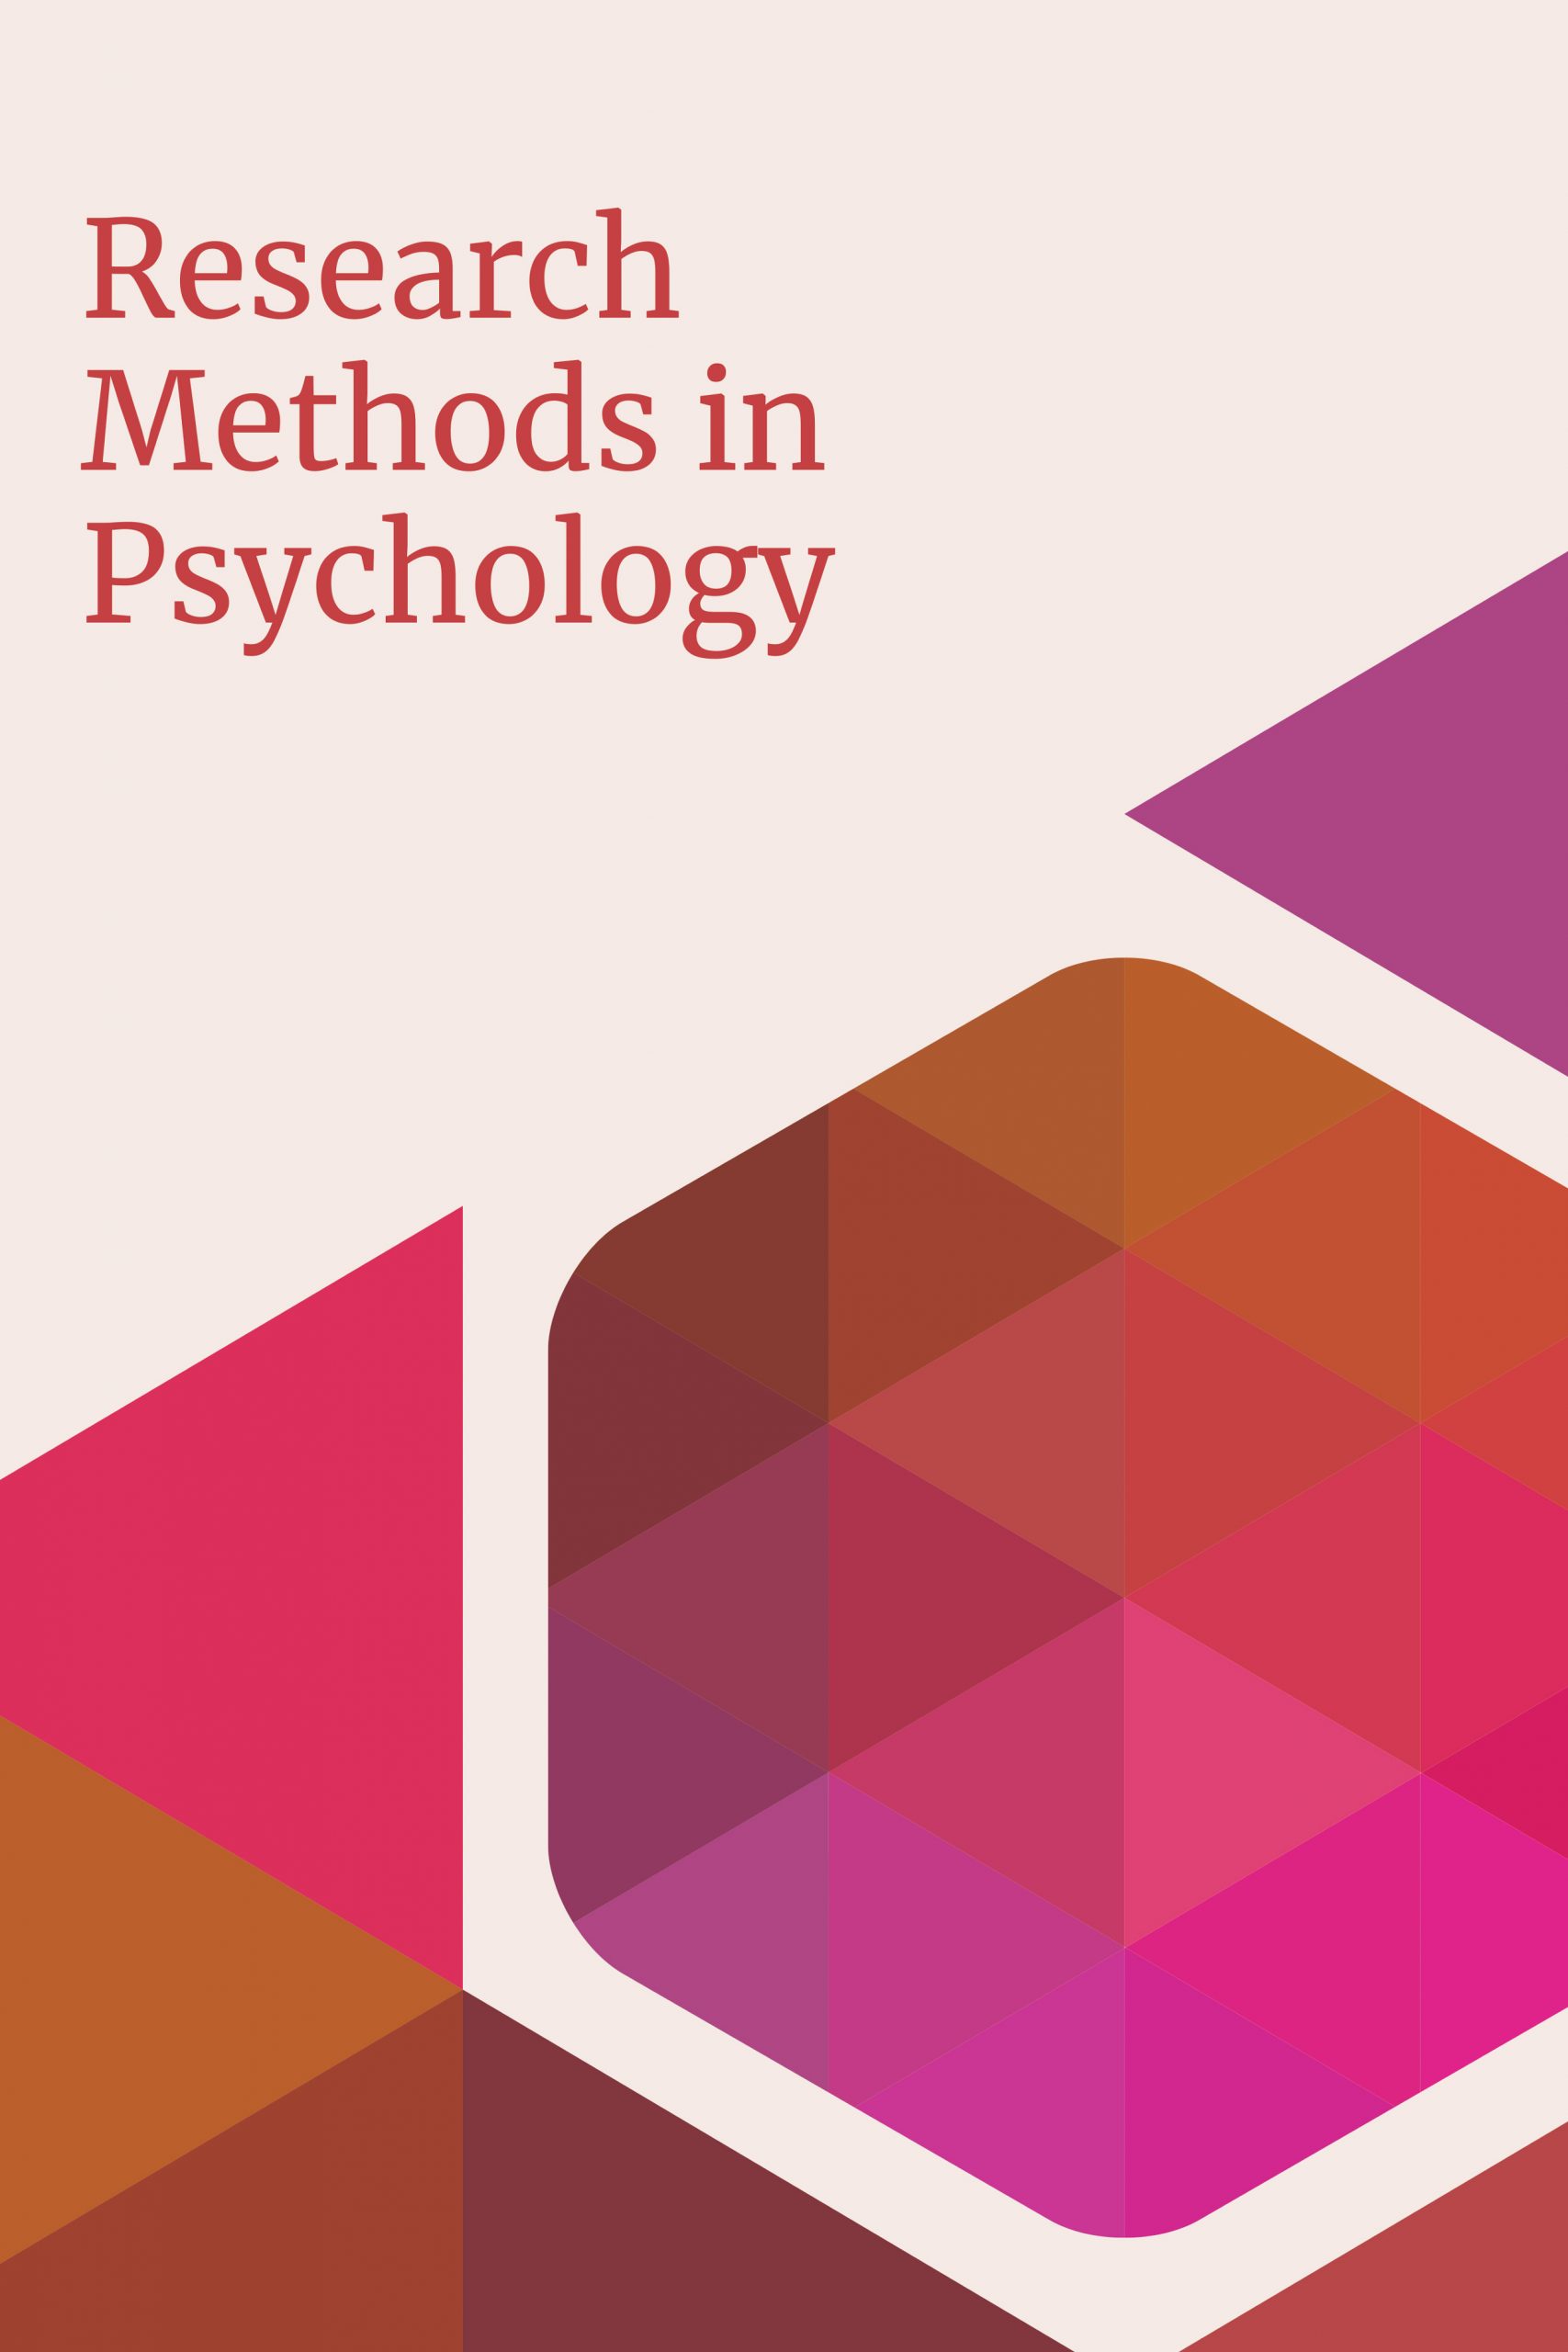 research methods in psychology course